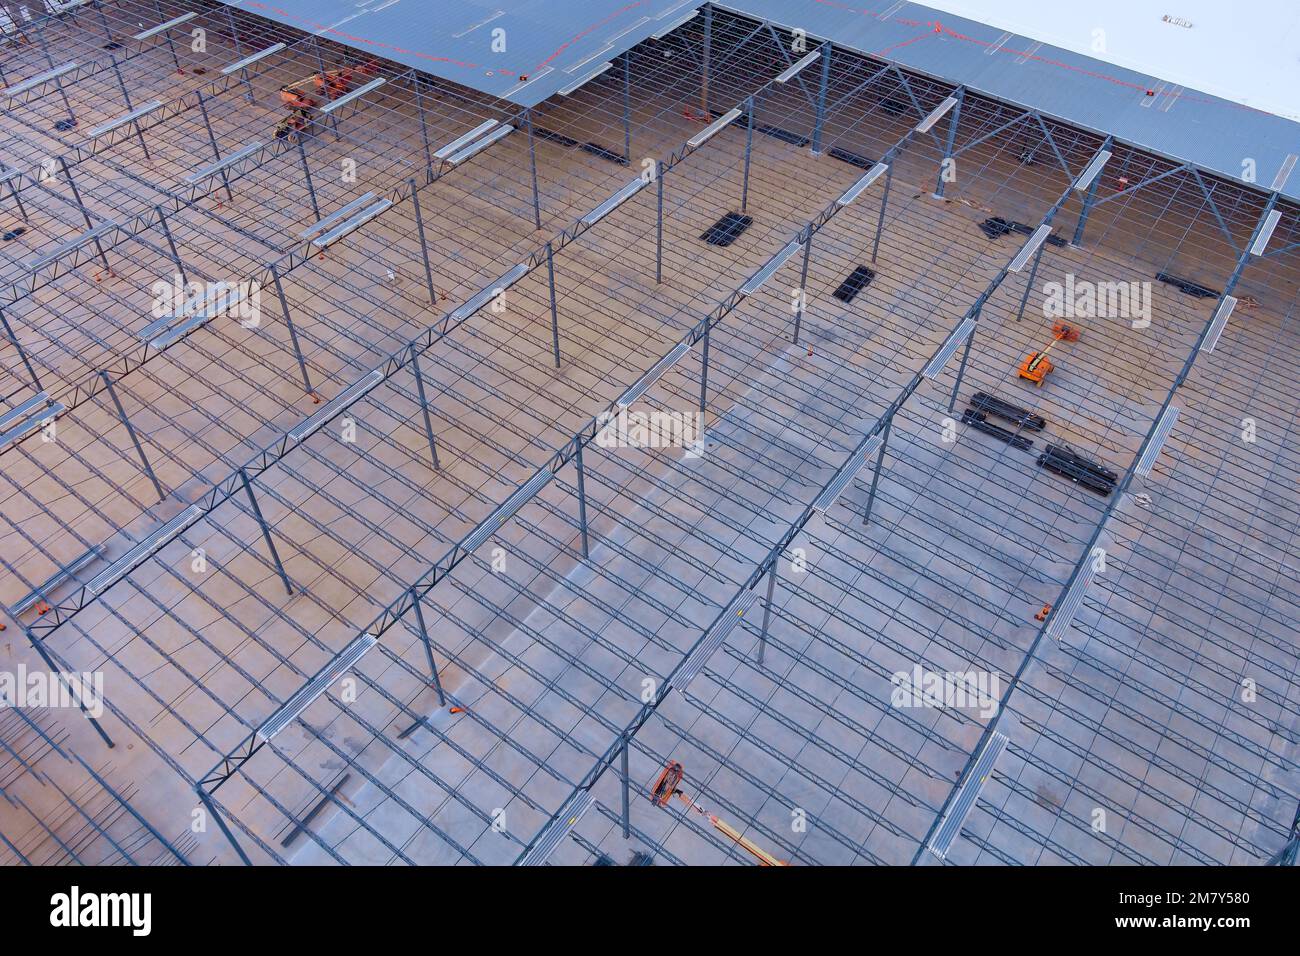 An under construction warehouse roof truss is made metal frame steel framework located on building site Stock Photo